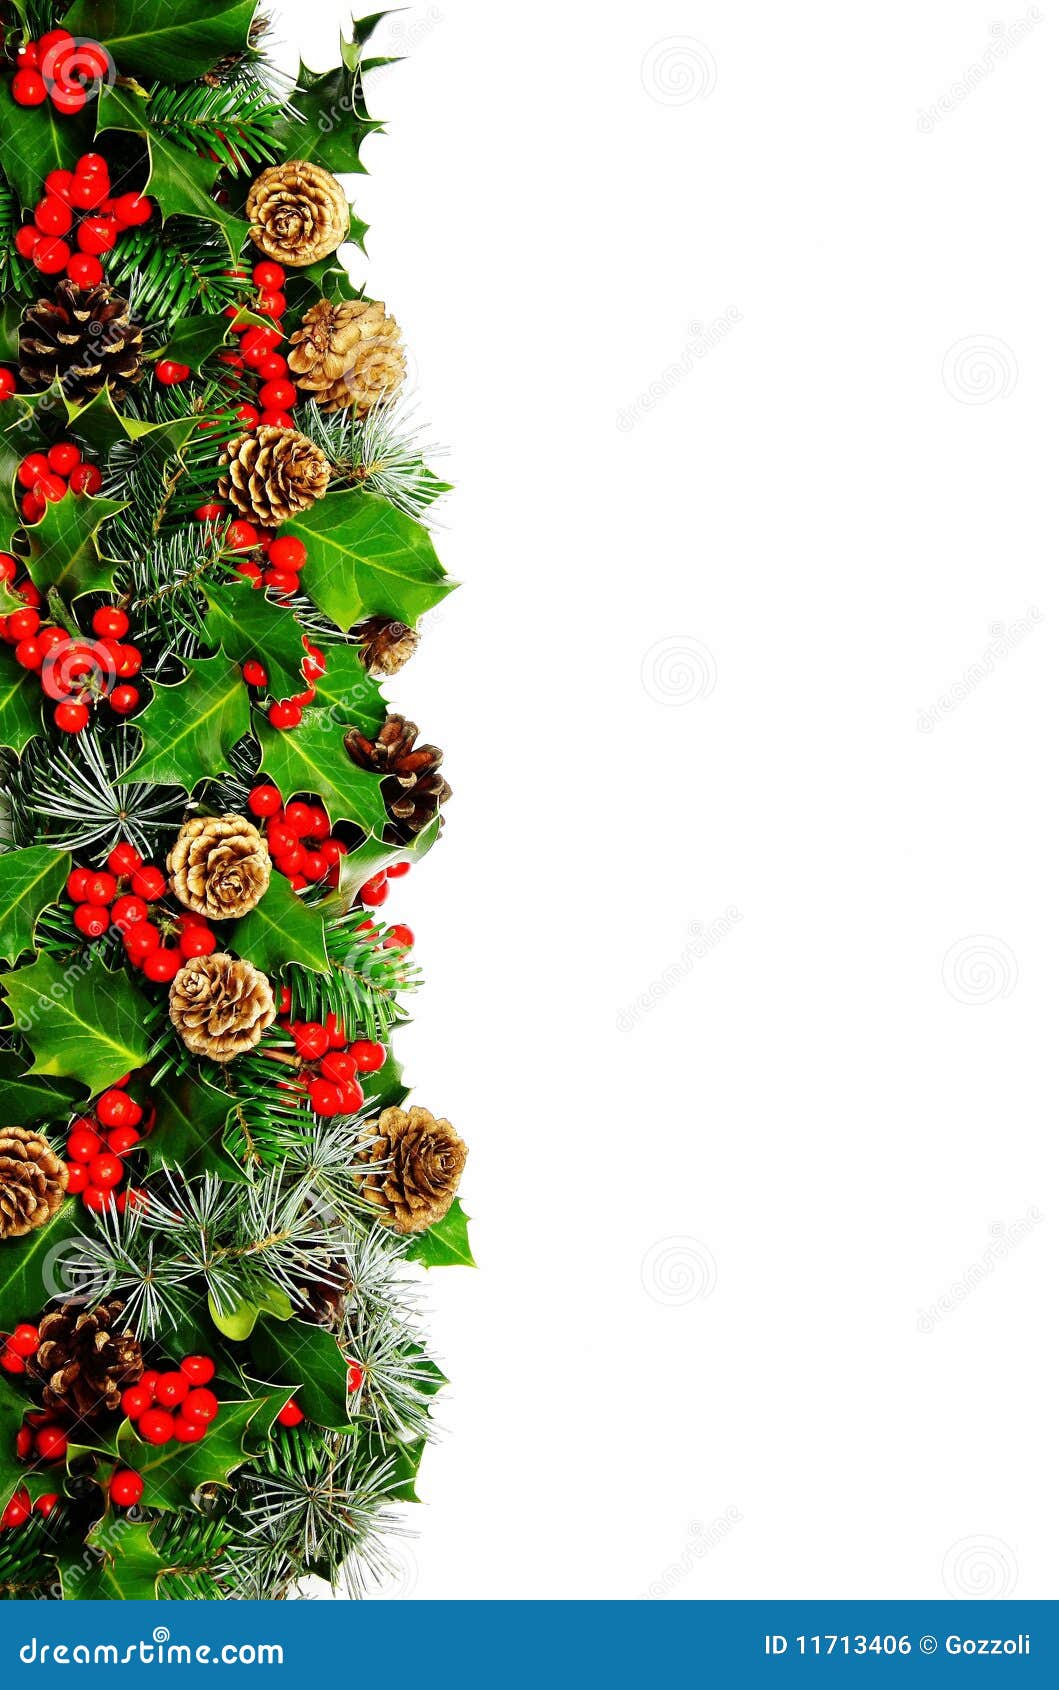 Traditional Christmas Border Stock Photo by ©marilyna 53286481